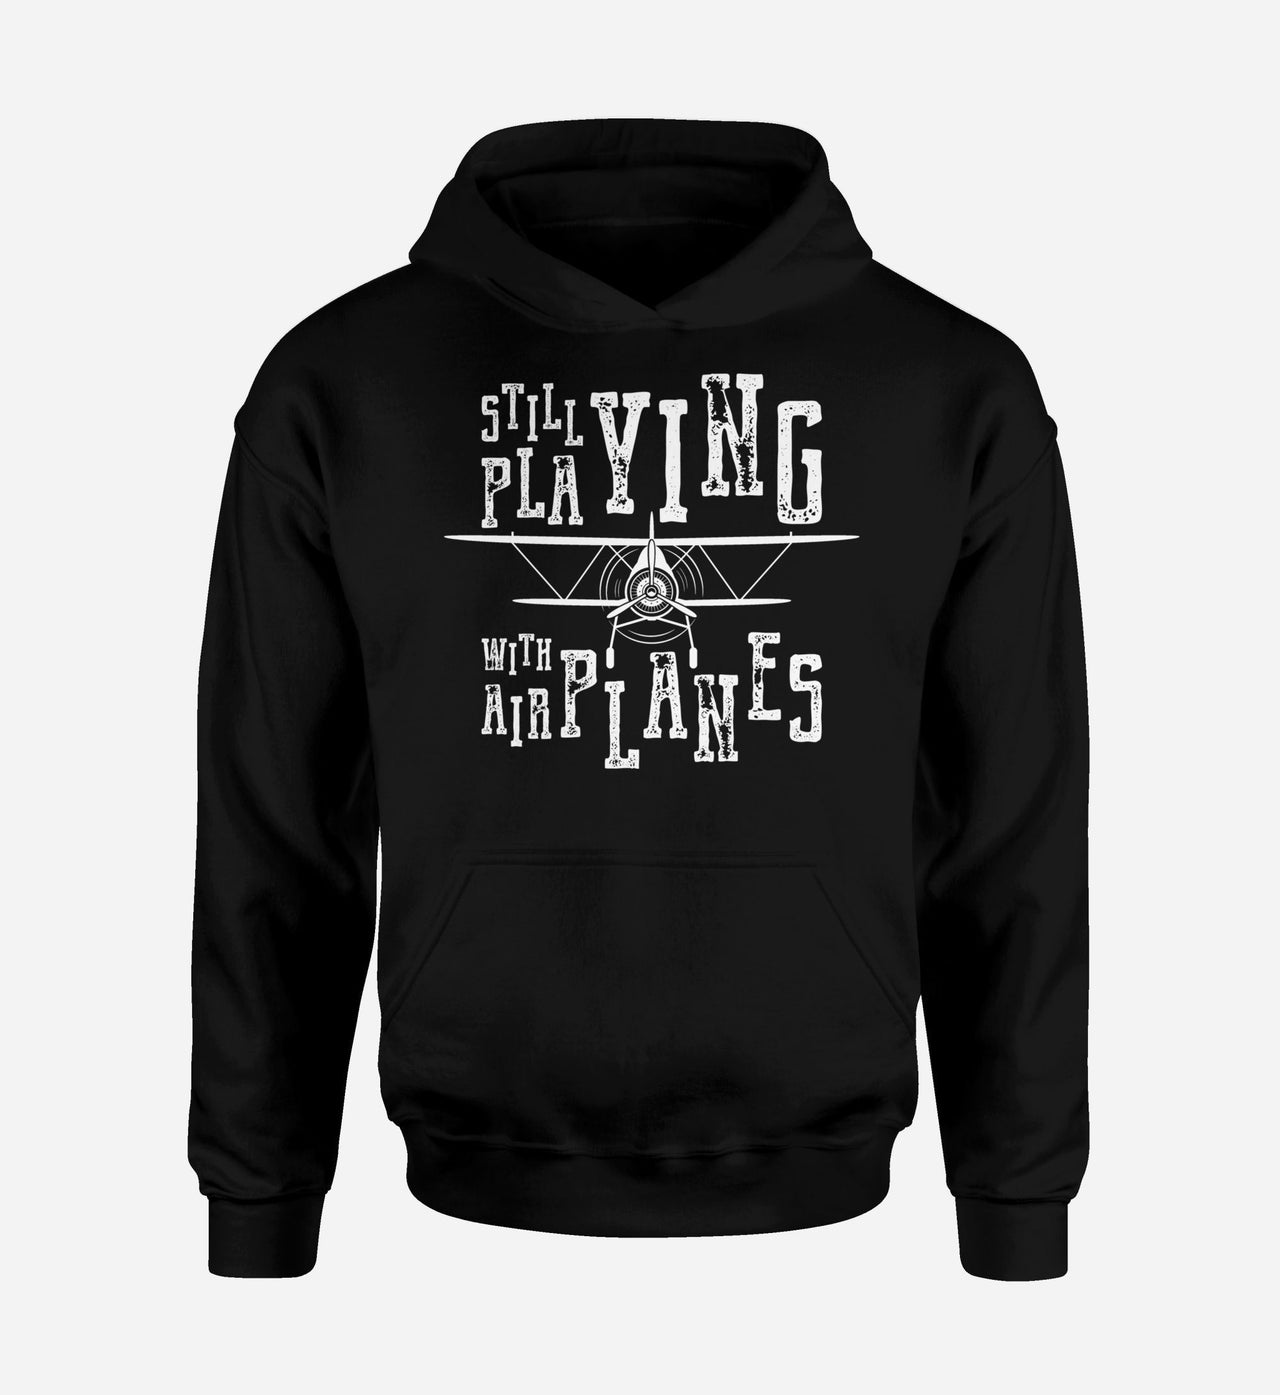 Still Playing With Airplanes Designed Hoodies